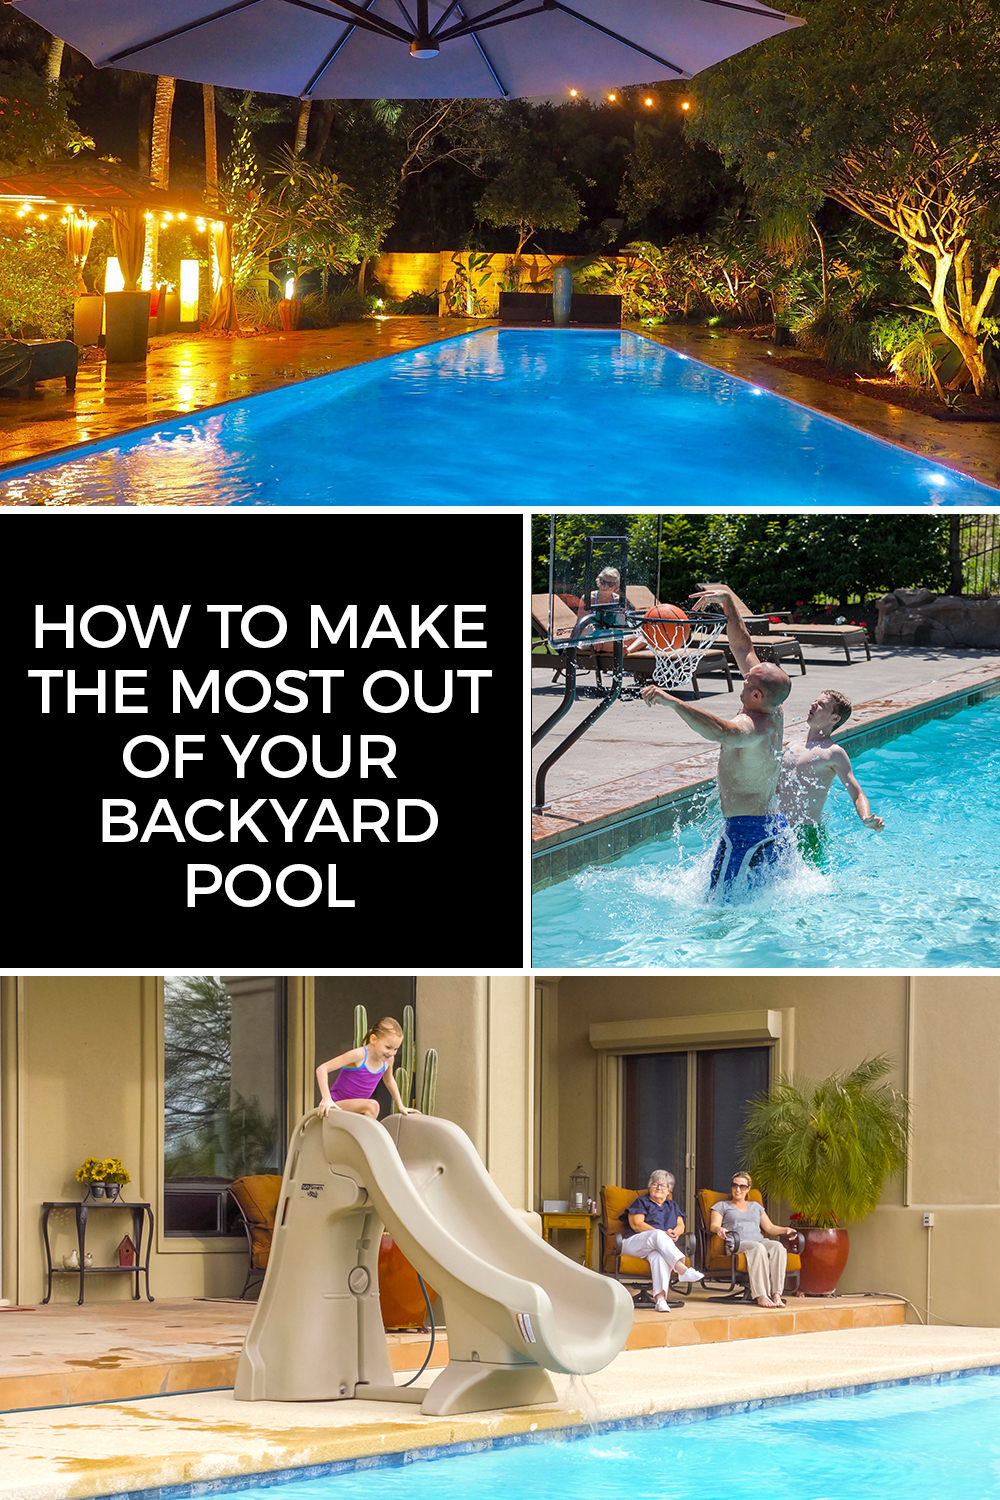 How to Make the Most Out of Your Backyard Pool